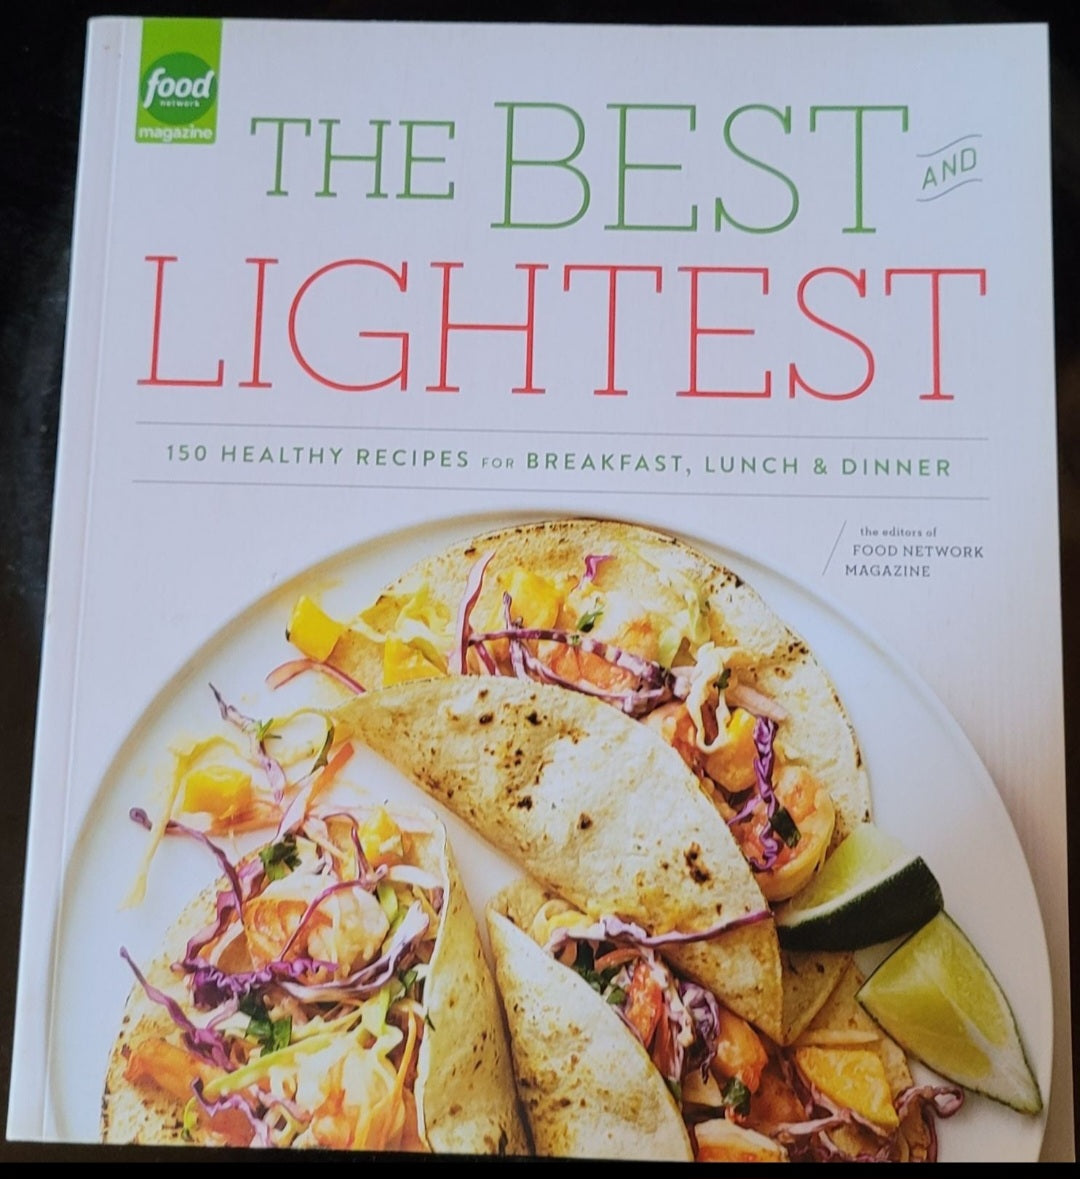 "The Best  and Lightest" cookbook